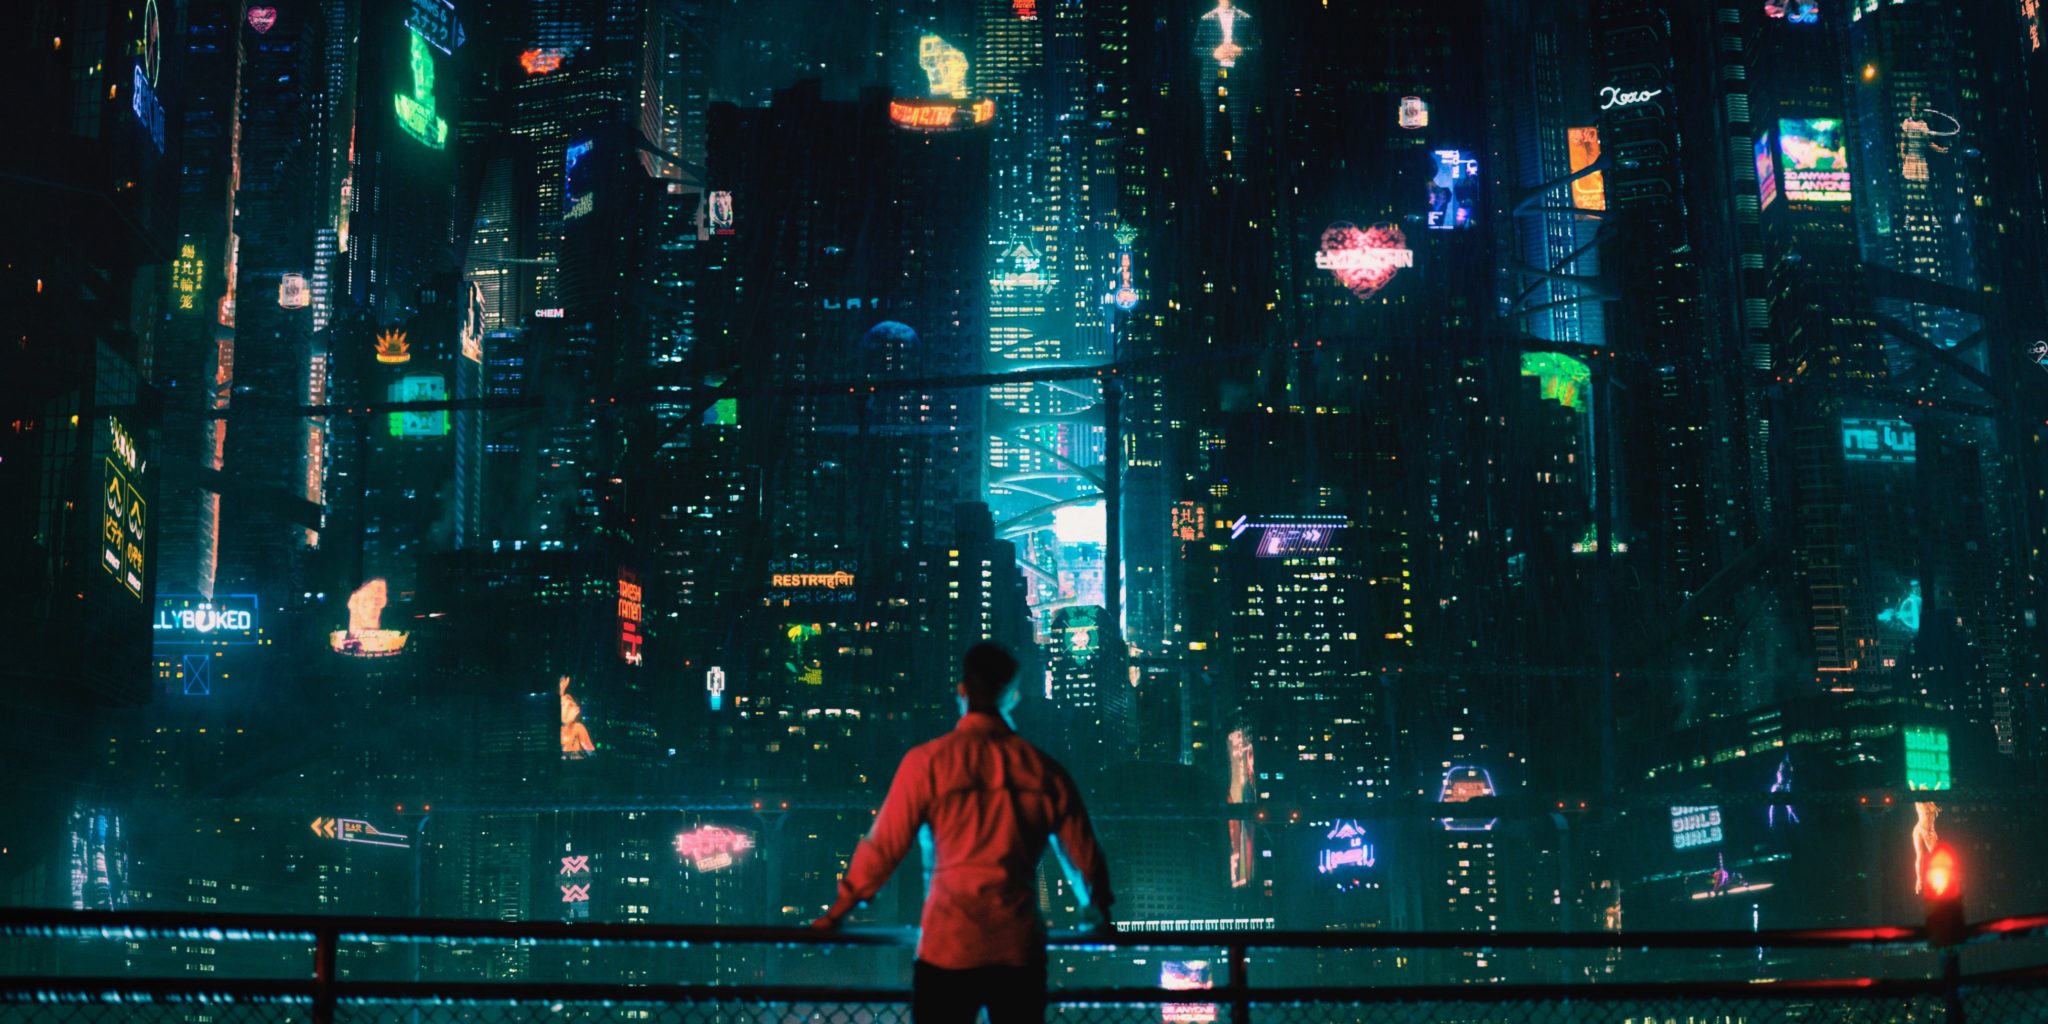 Altered Carbon drops on Netflix on February 2